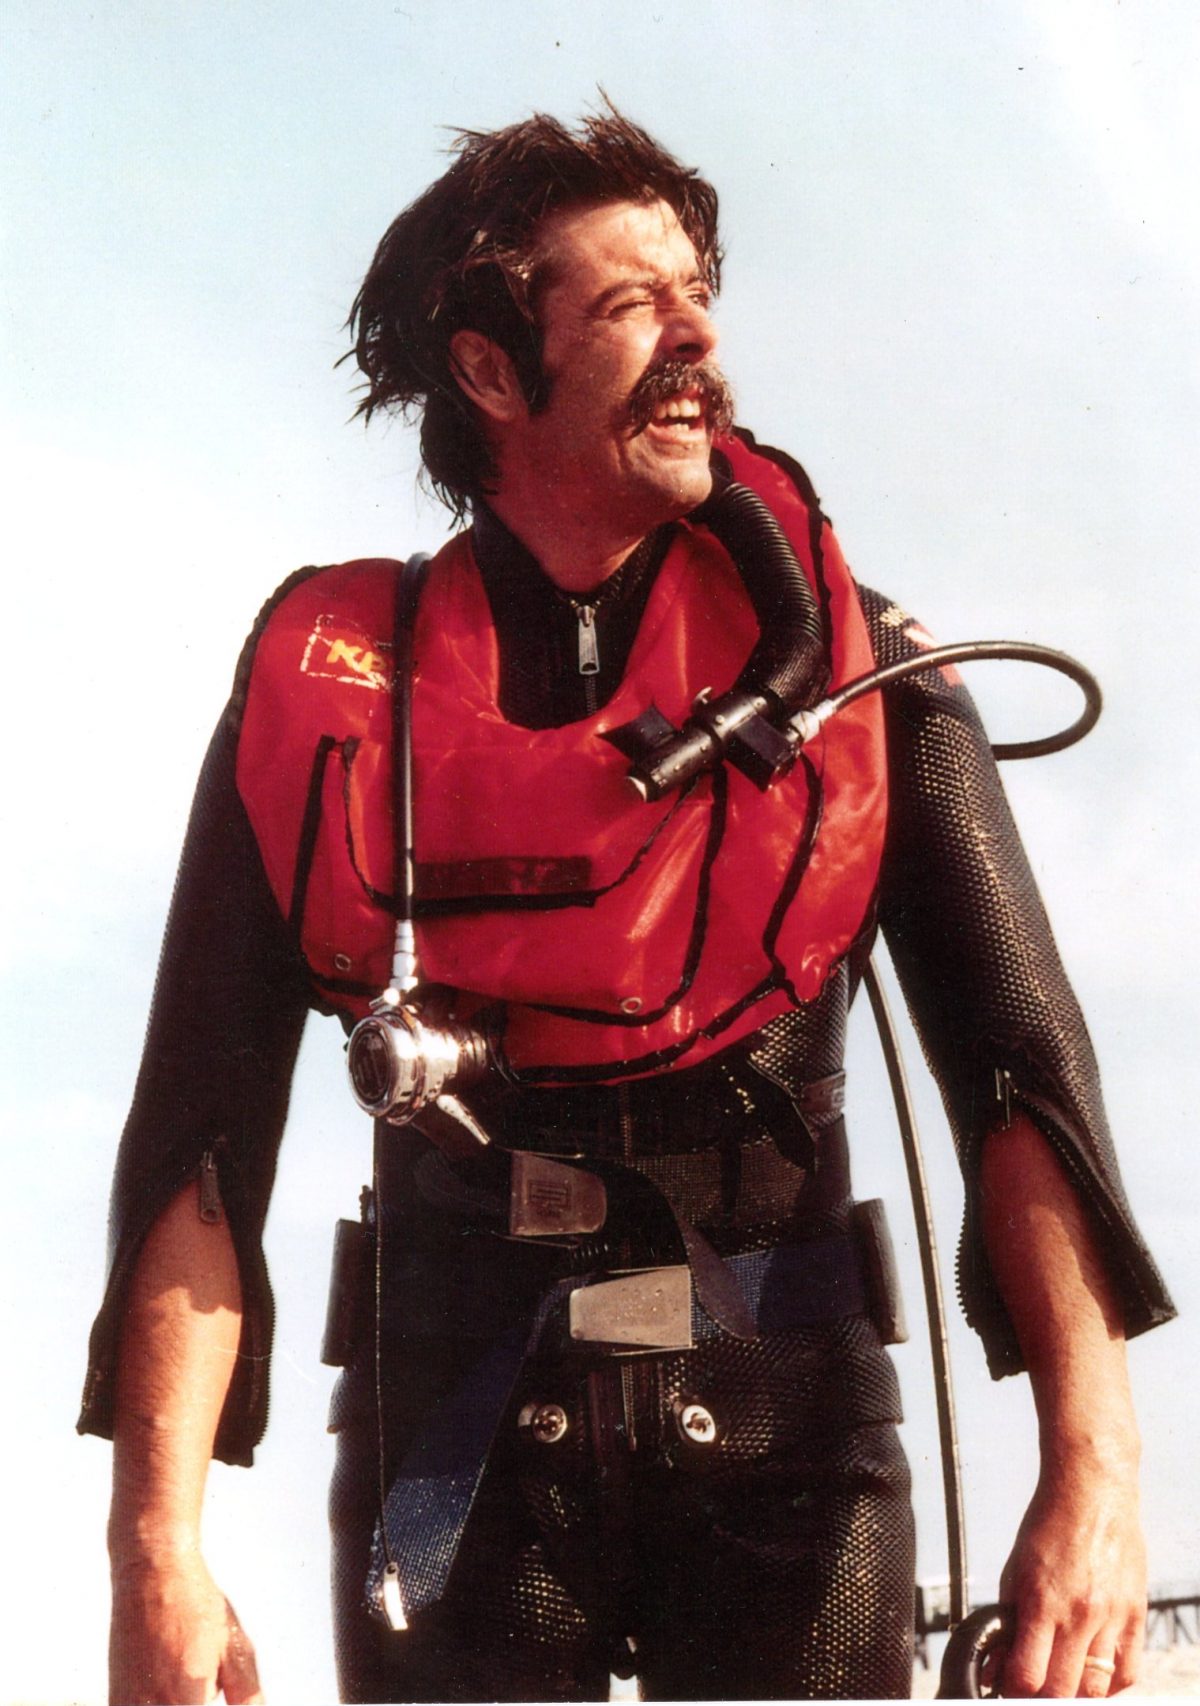 Jackson Andrews in dive gear on Cape Cod